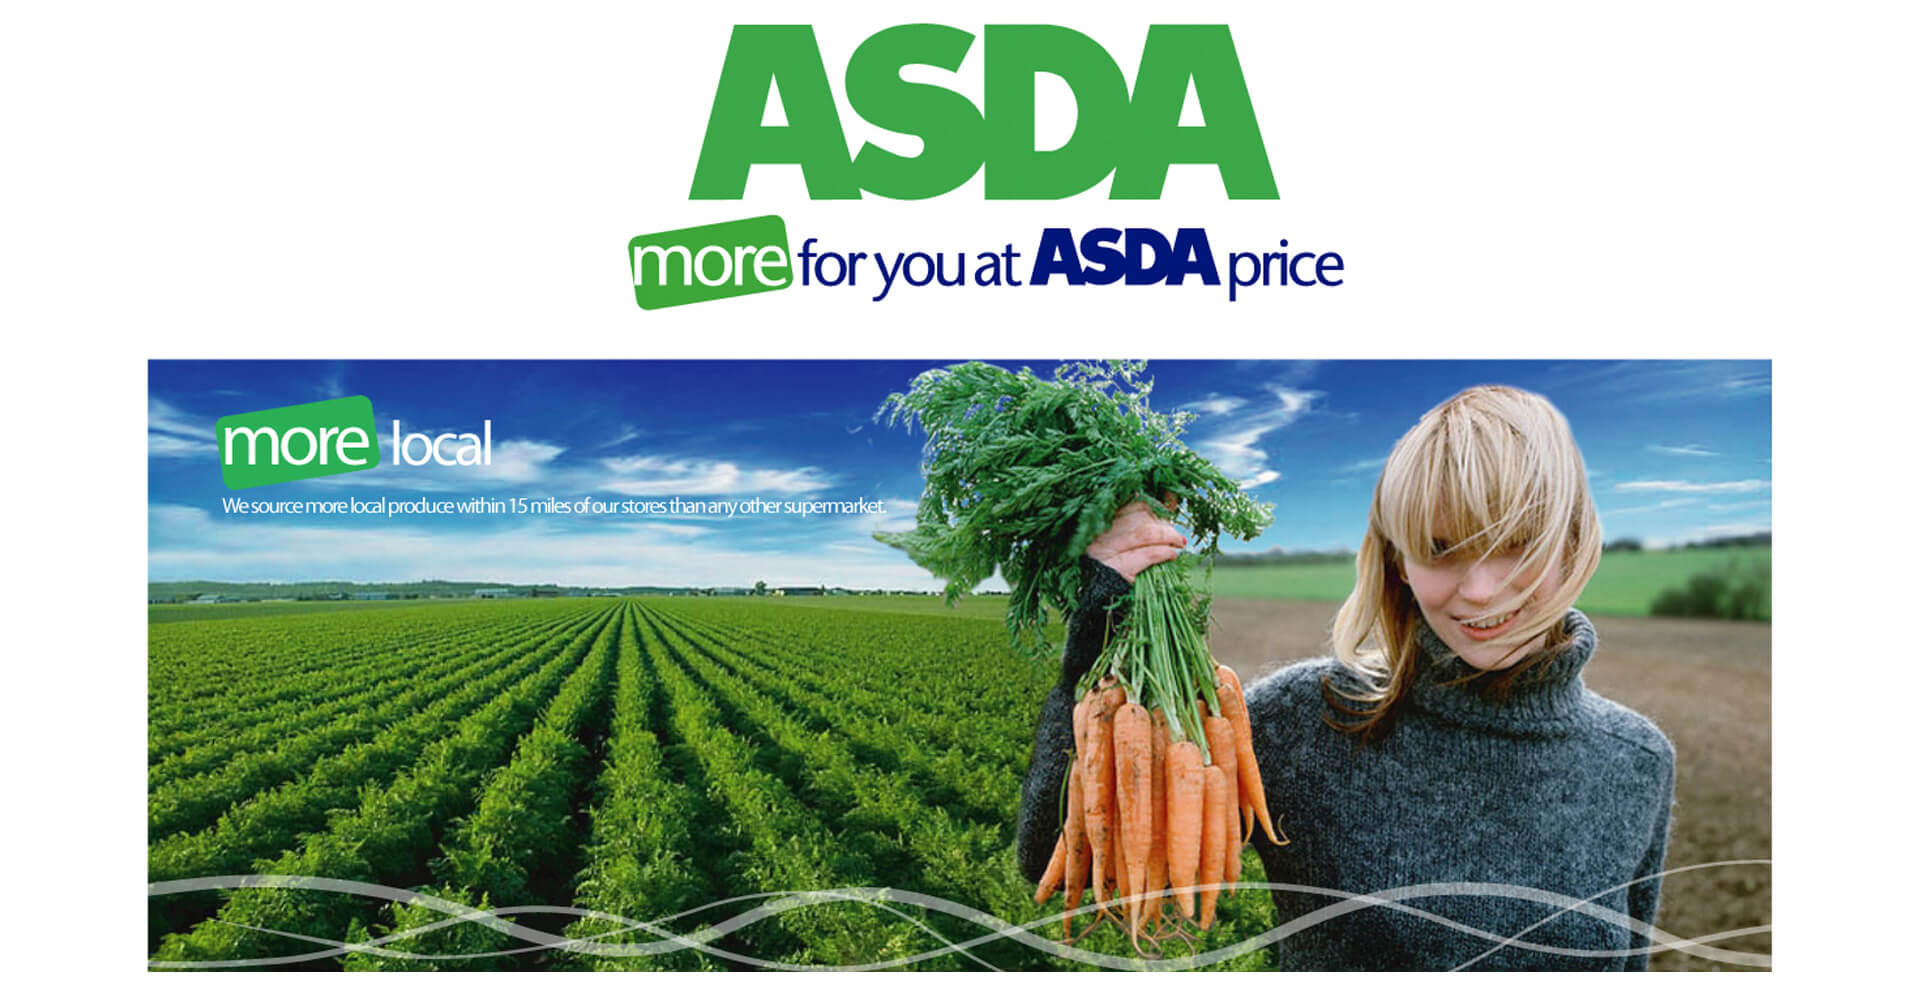 Brand identity change new brand concept for Asda more for you at Asda price